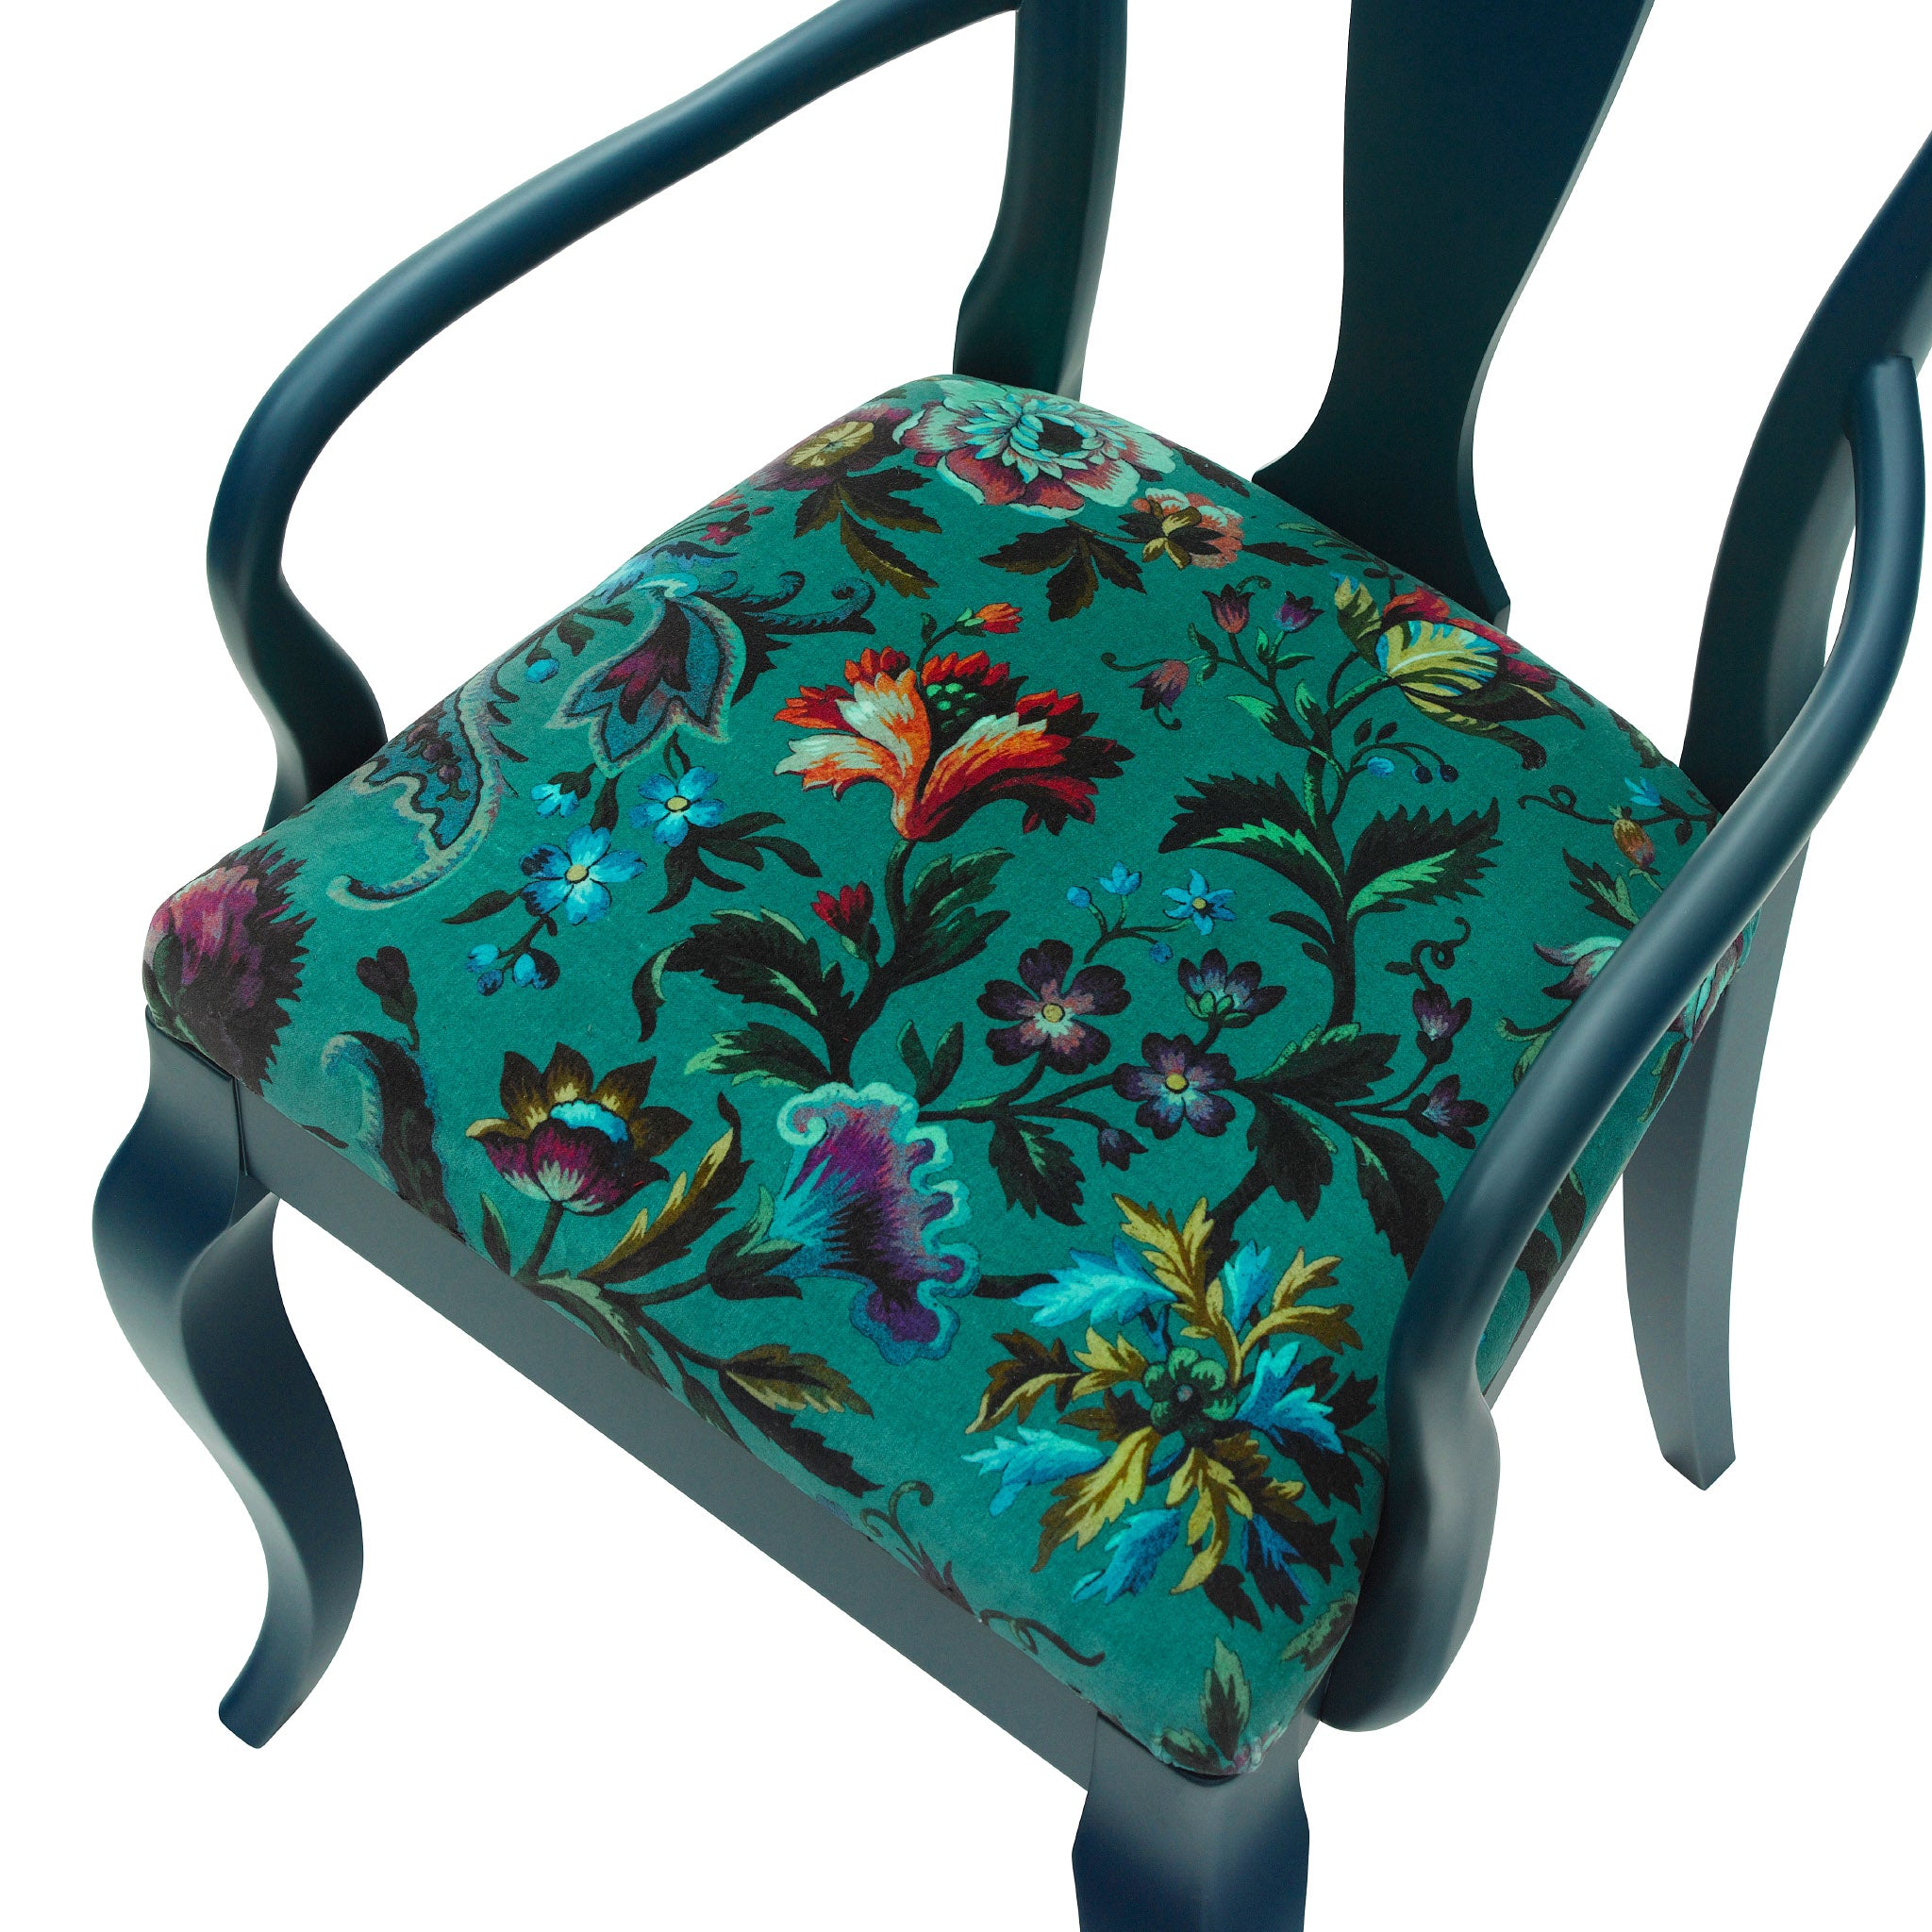 Marco Chair Upholstered in Florika by House of Hackney